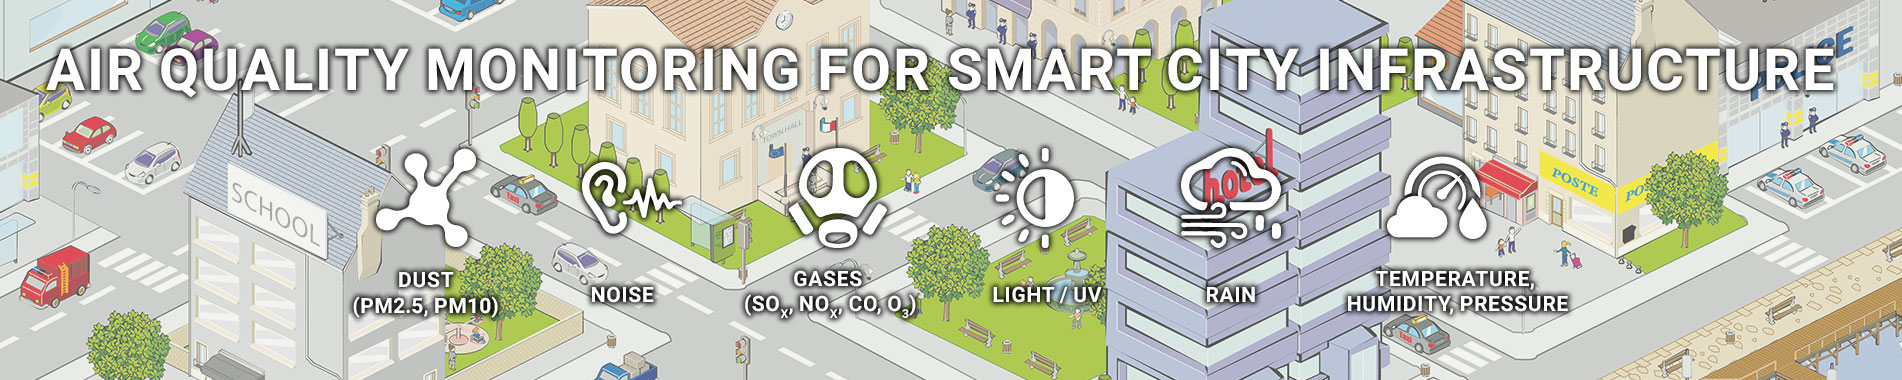 AIR QUALITY MONITORING FOR SMART CITY INFRASTRUCTURE